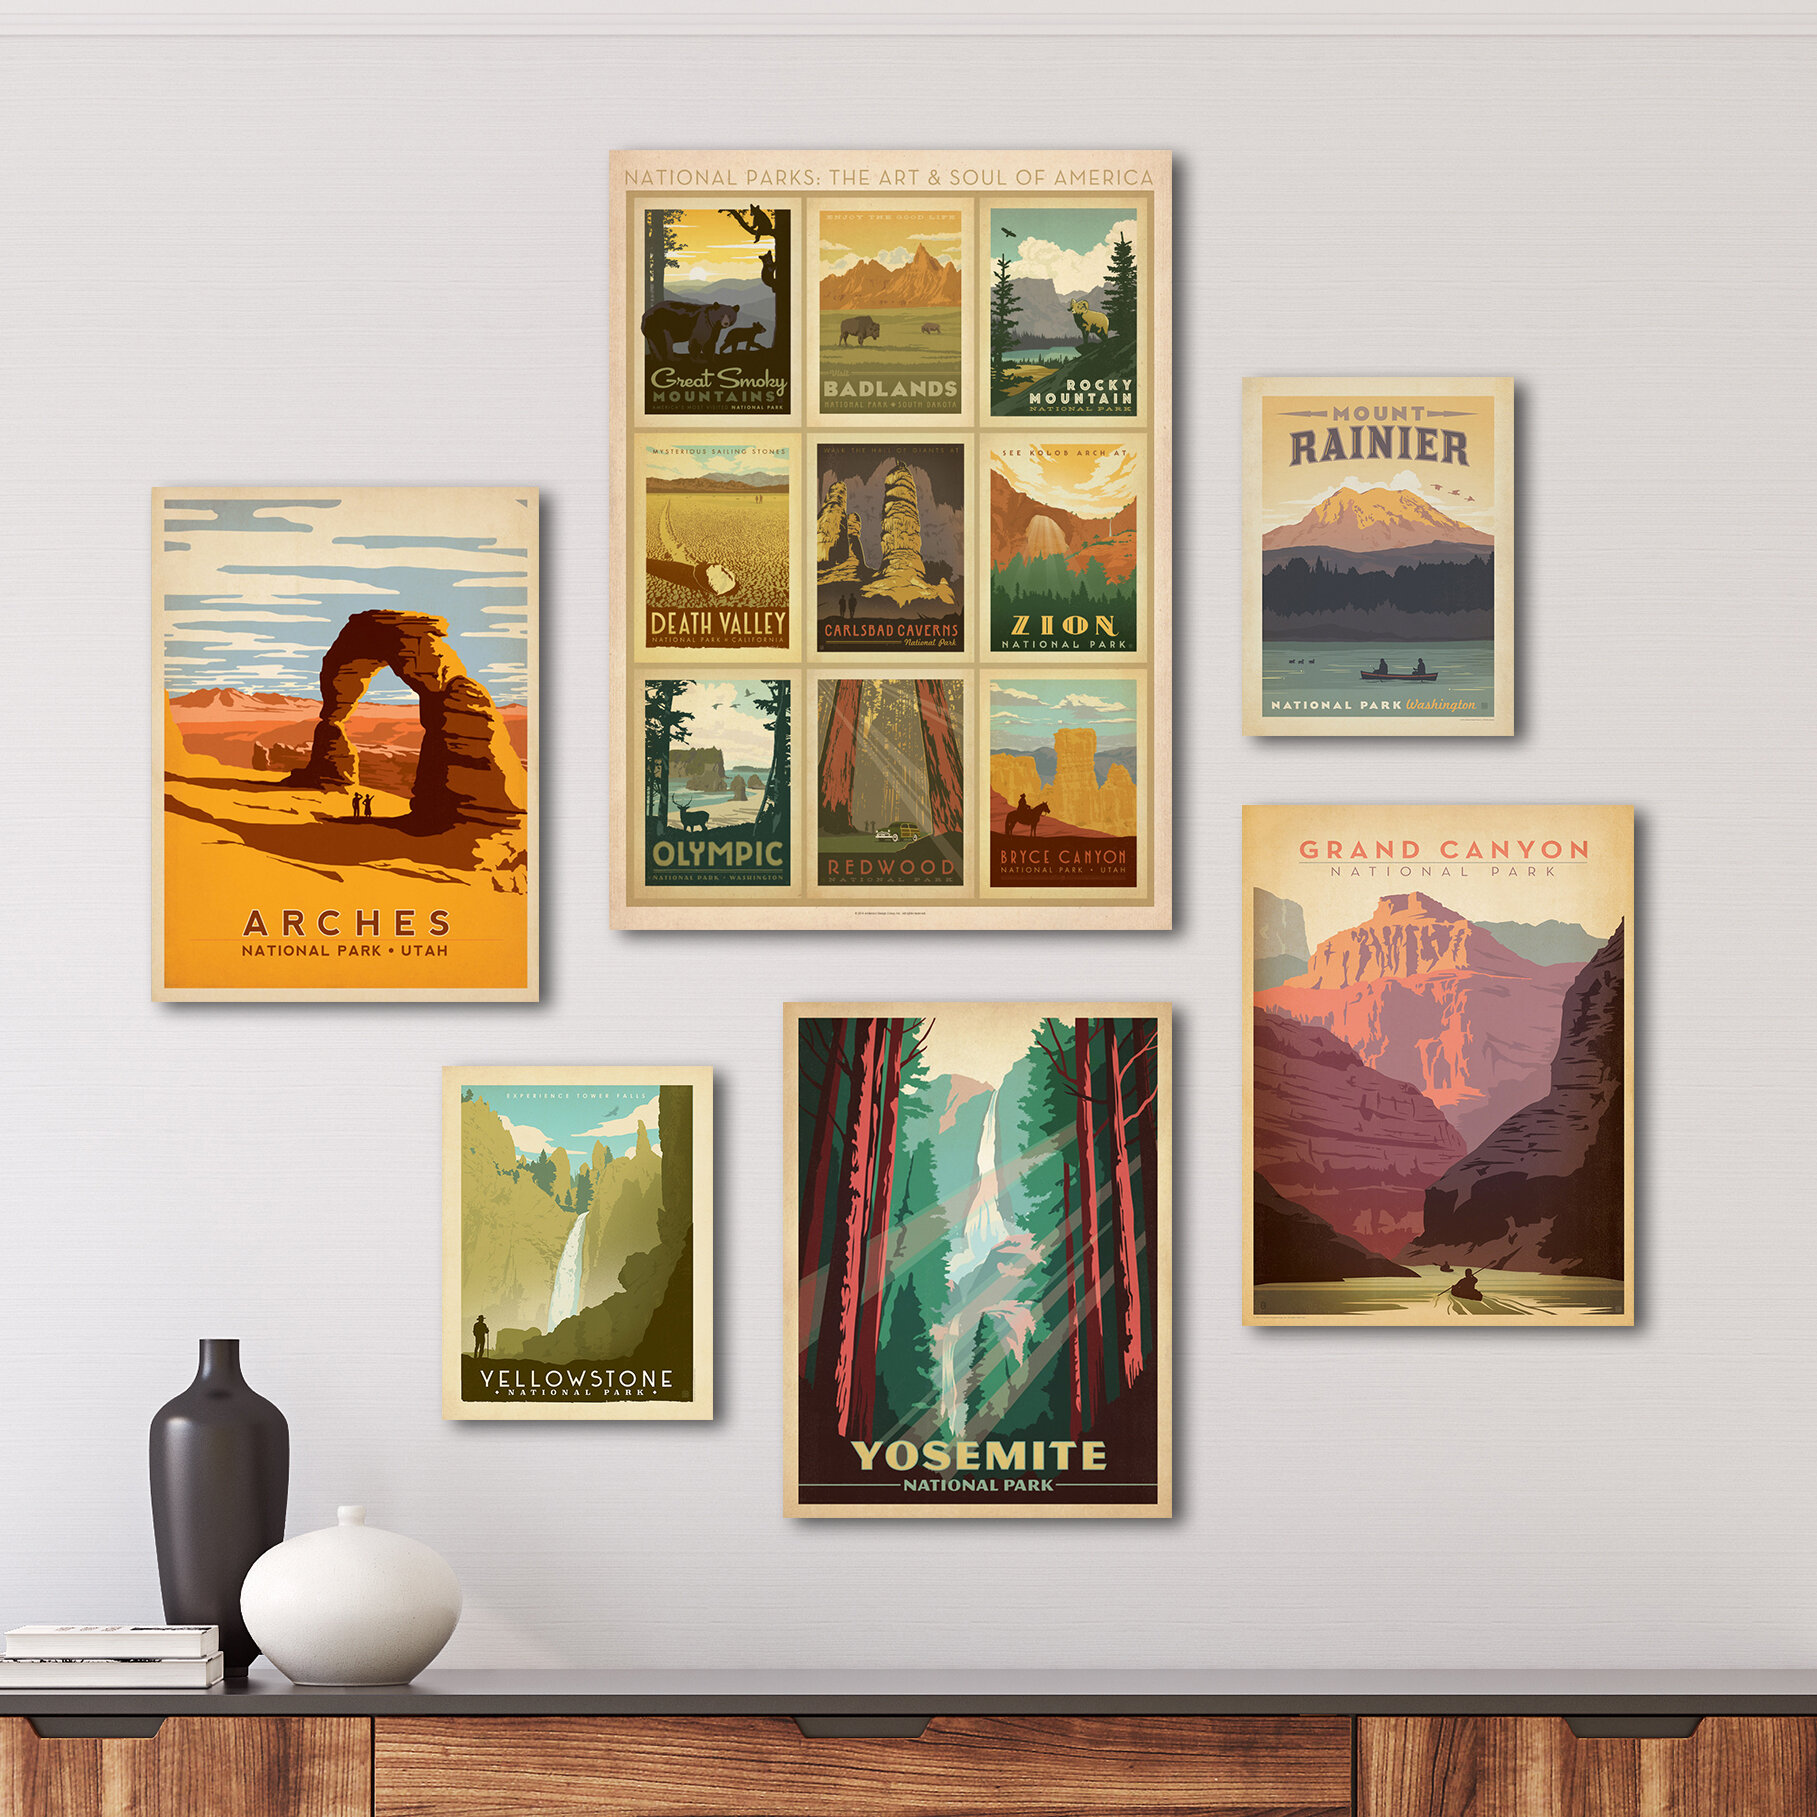 Bless international Vintage Landscape Canvas Wall Art National Parks  by Anderson Design Group  Reviews Wayfair